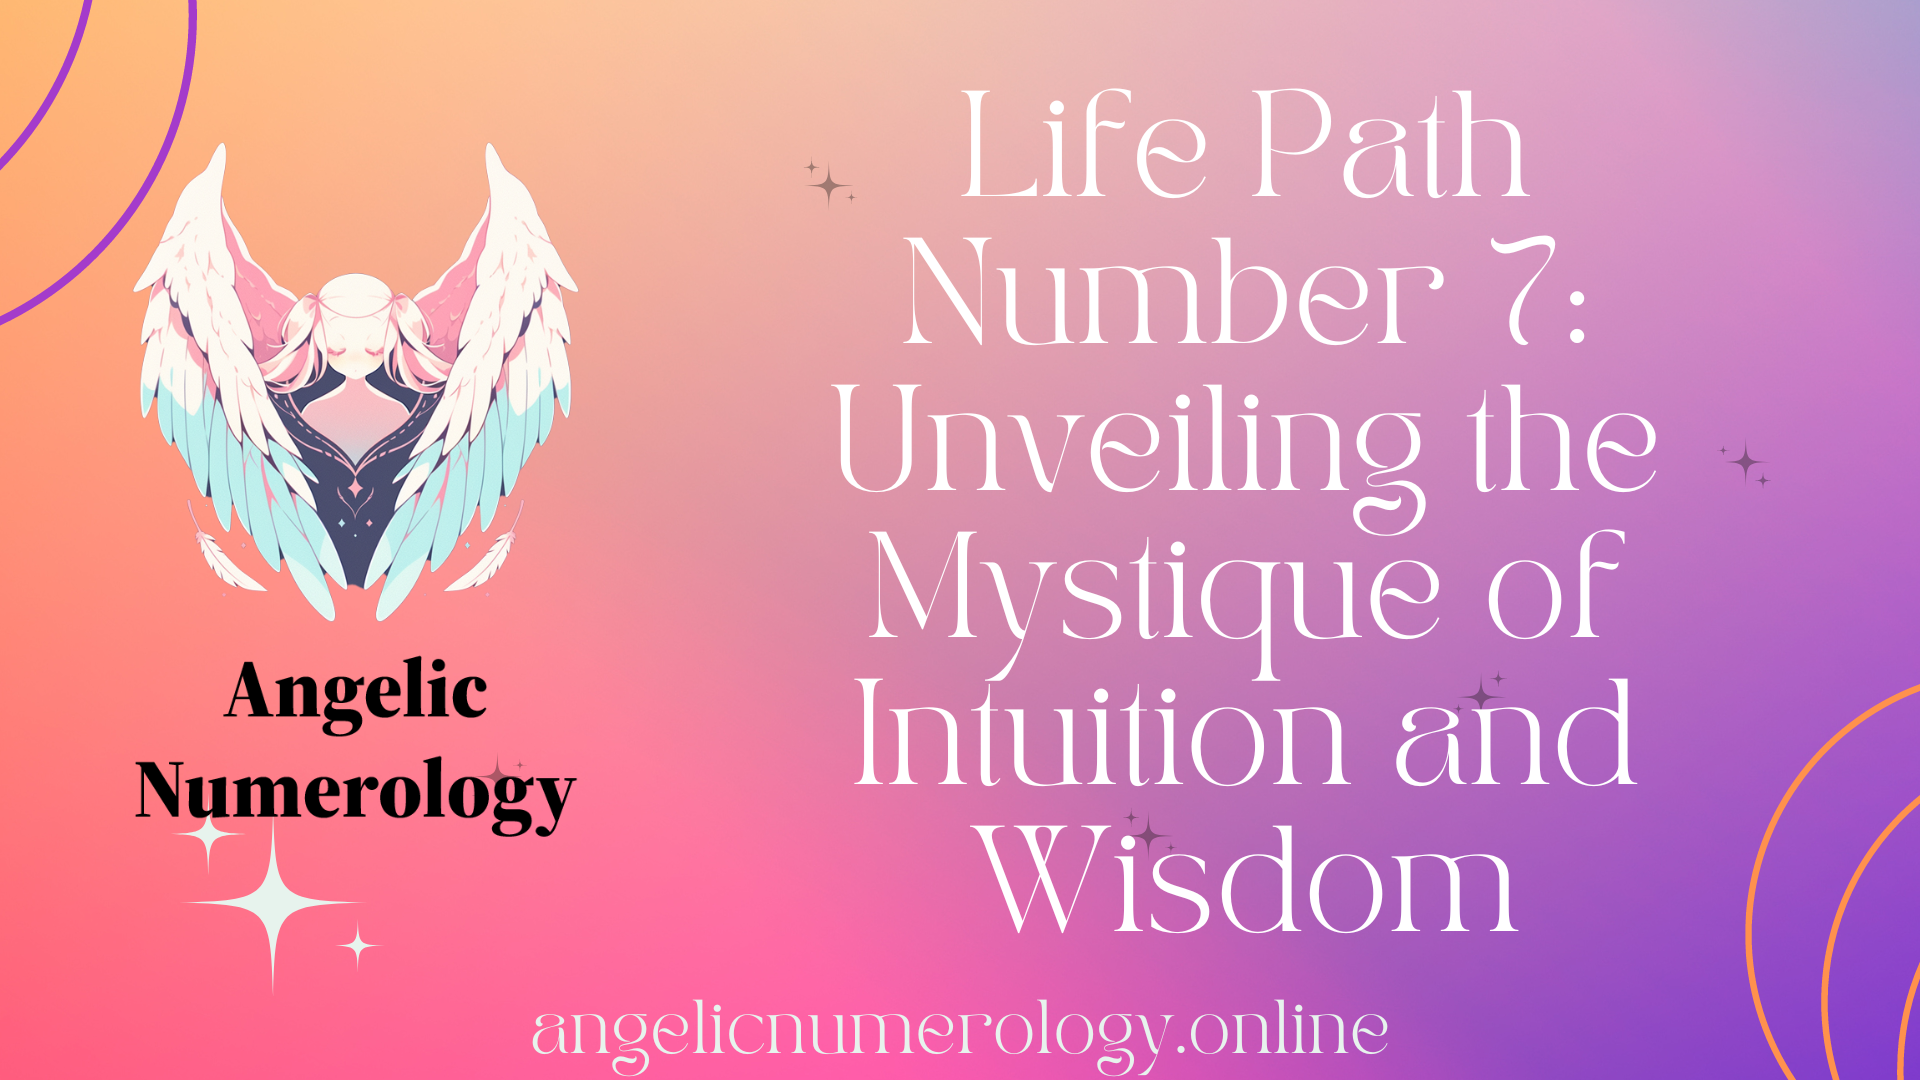 Life Path Number 7: Unveiling the Mystique of Intuition and Wisdom